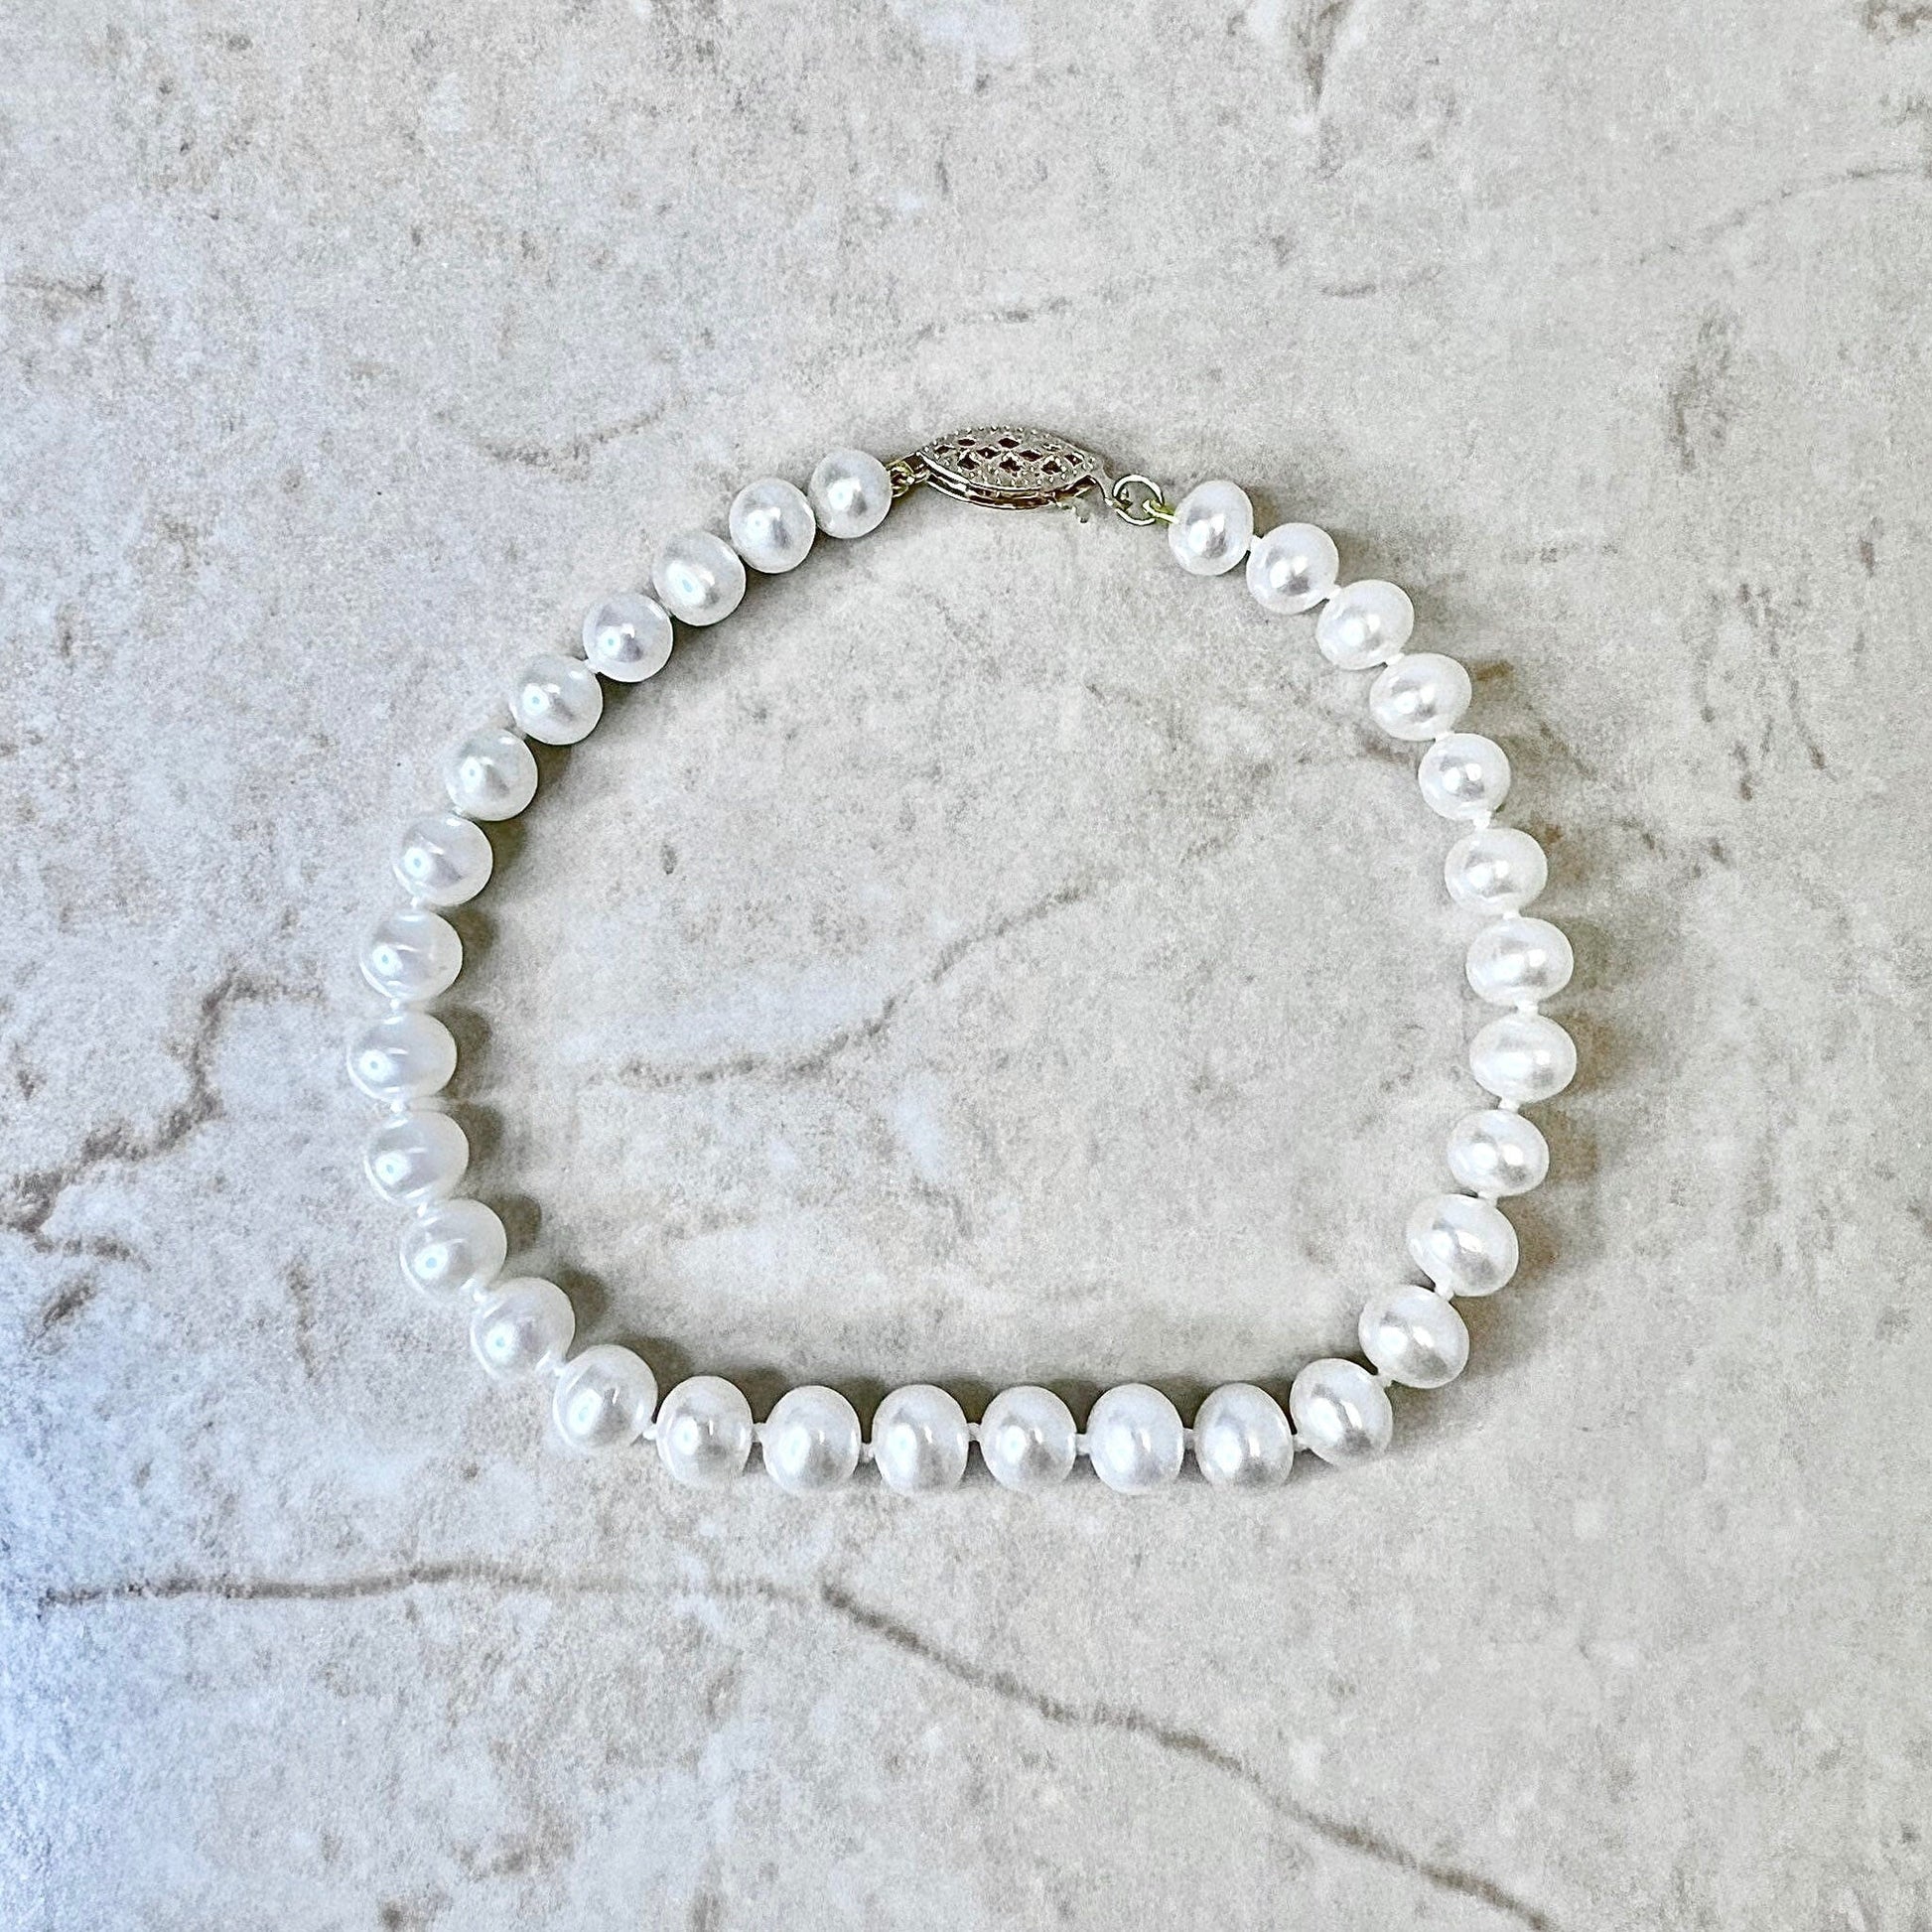 Pearl Bracelet Freshwater White Pearl Strand With 14K Yellow Gold Clasp - Genuine Pearls - Birthday Gift -June Birthstone -Best Gift For Her